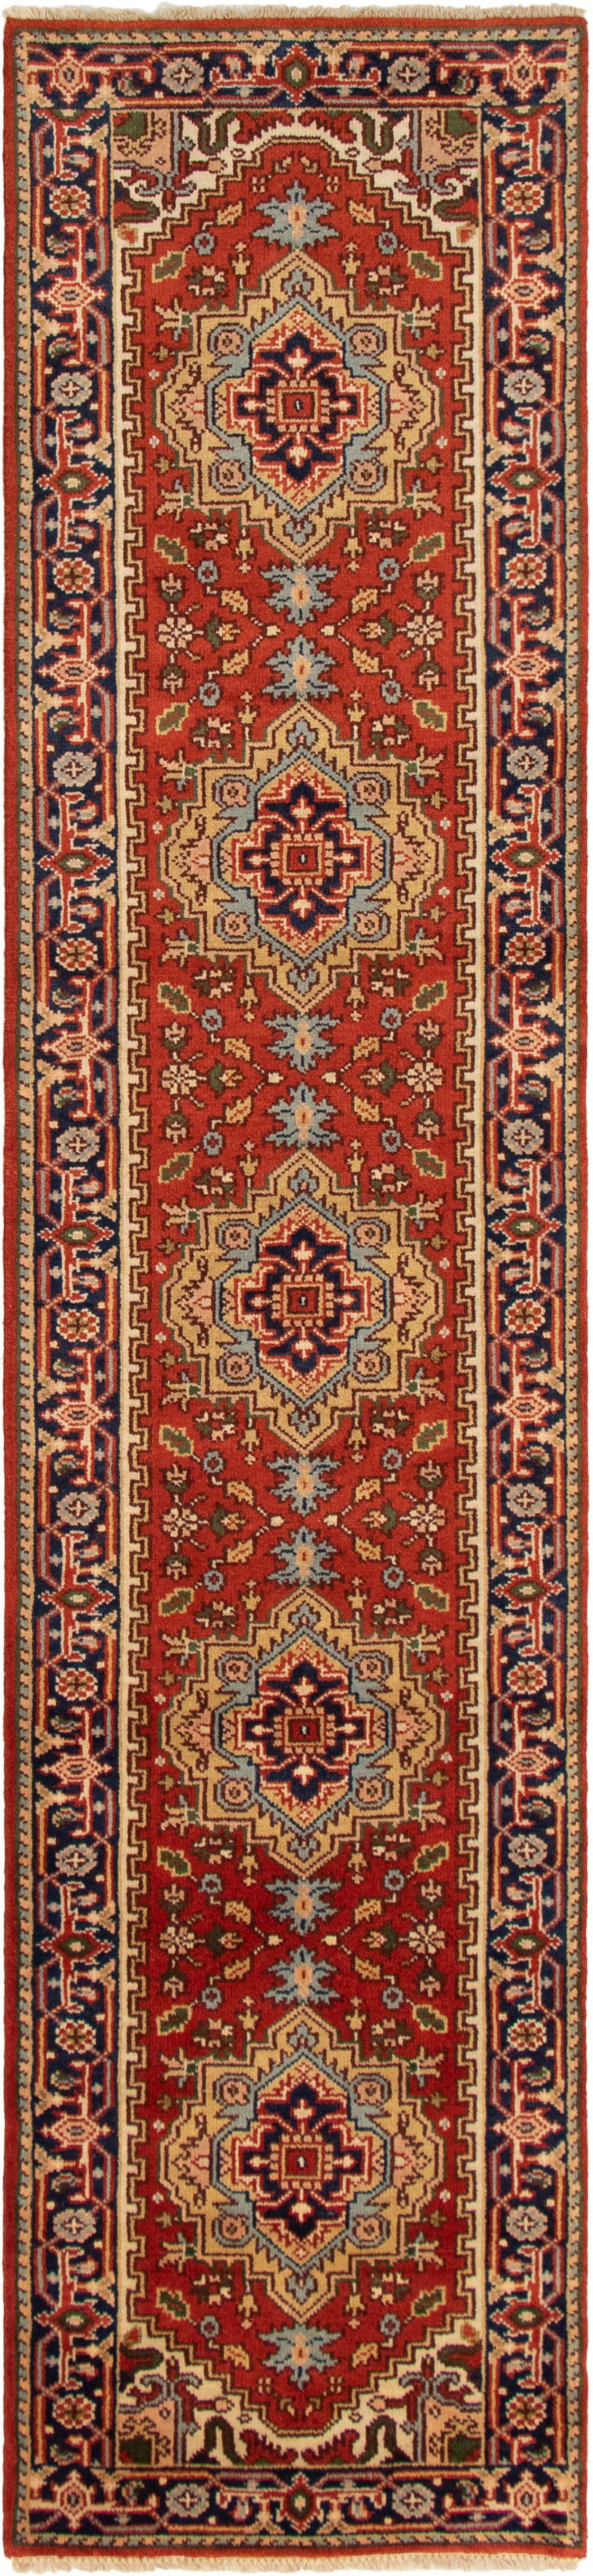 Hand-knotted Serapi Heritage Dark Copper Wool Rug 2'6" x 11'9" (15) Size: 2'6" x 11'9"  